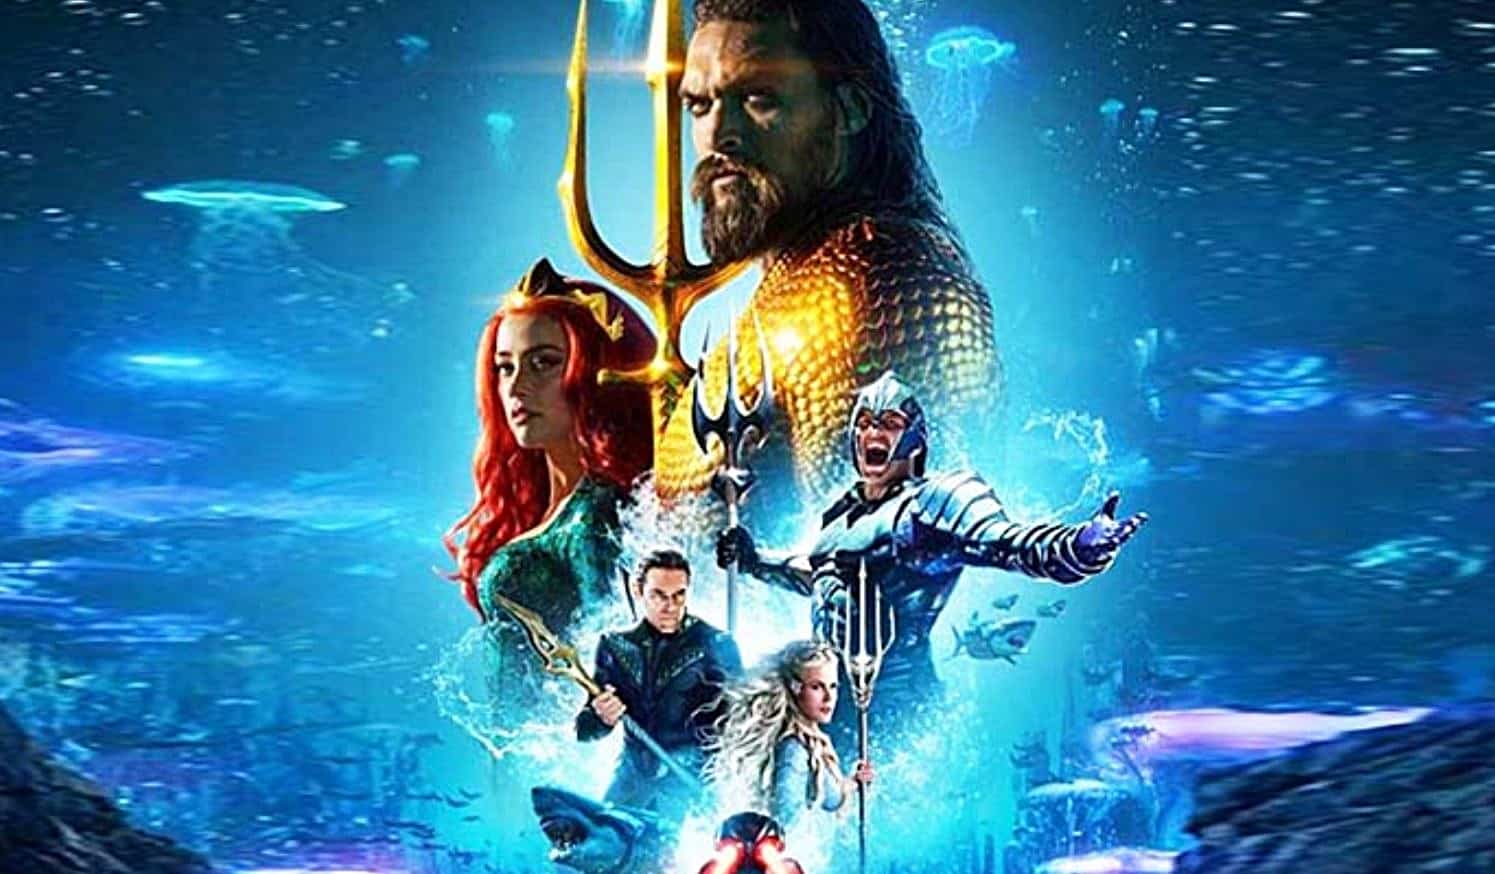 Aquaman' Review: A Very Fun And Entertaining DC Movie